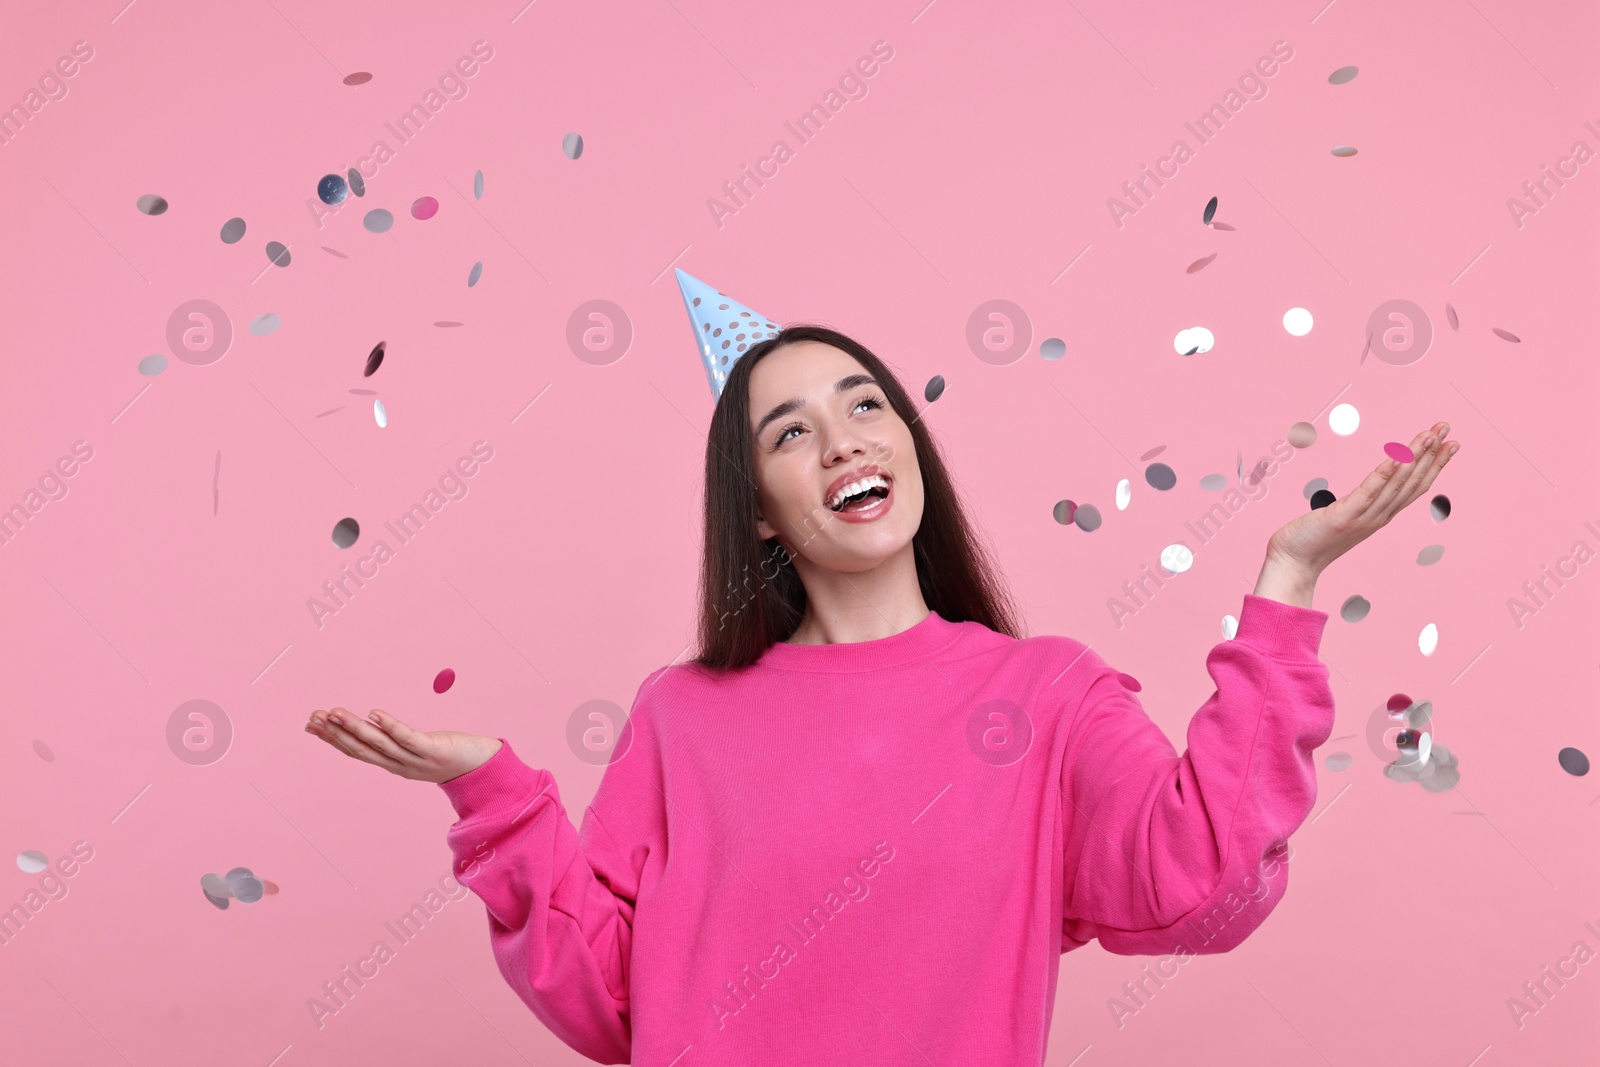 Photo of Happy woman in party hat throwing confetti on pink background